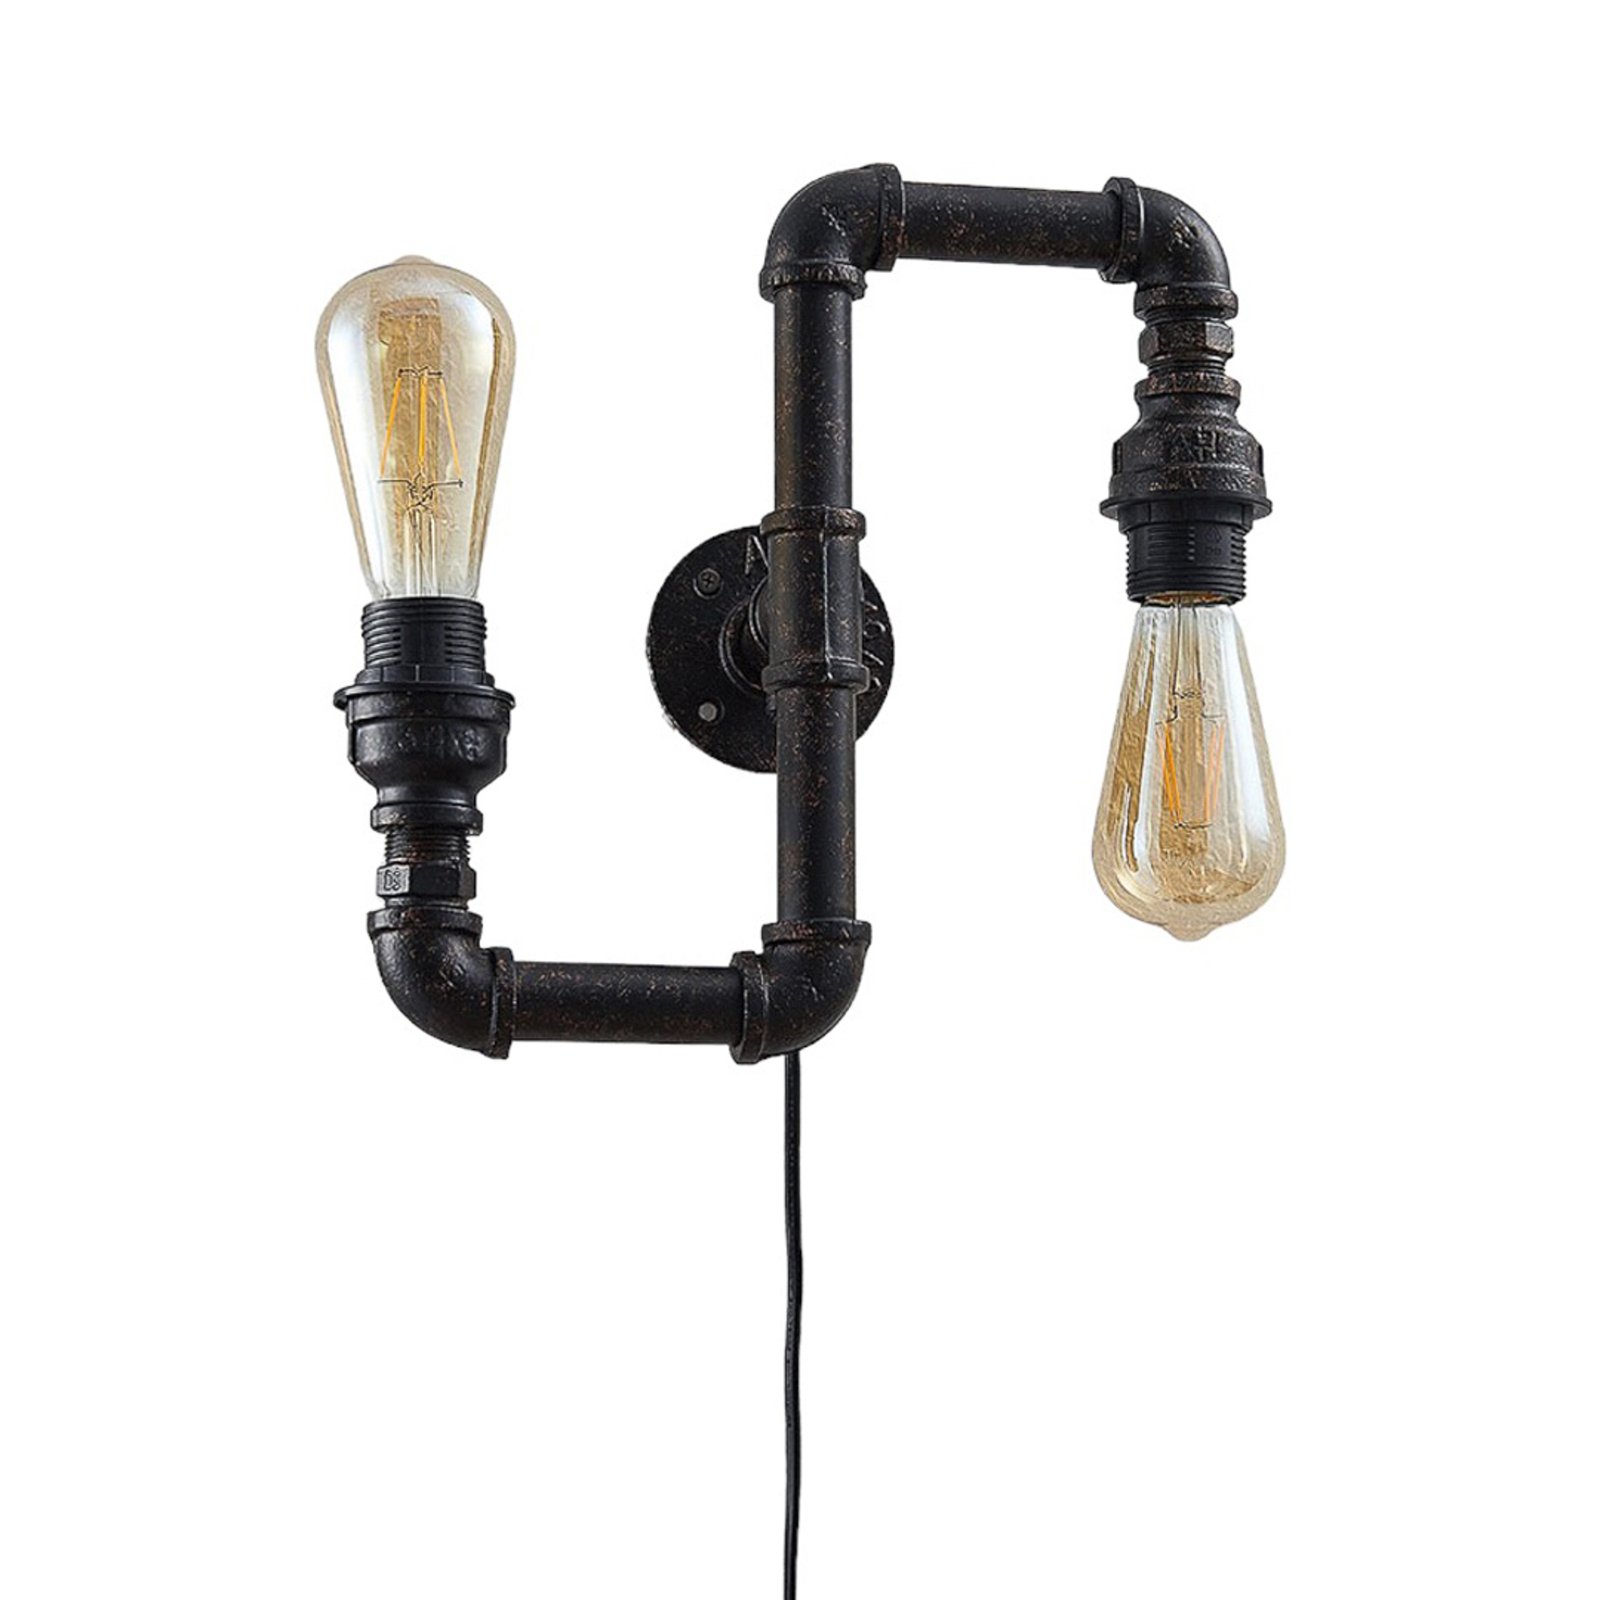 Josip industrial style wall light, up & down